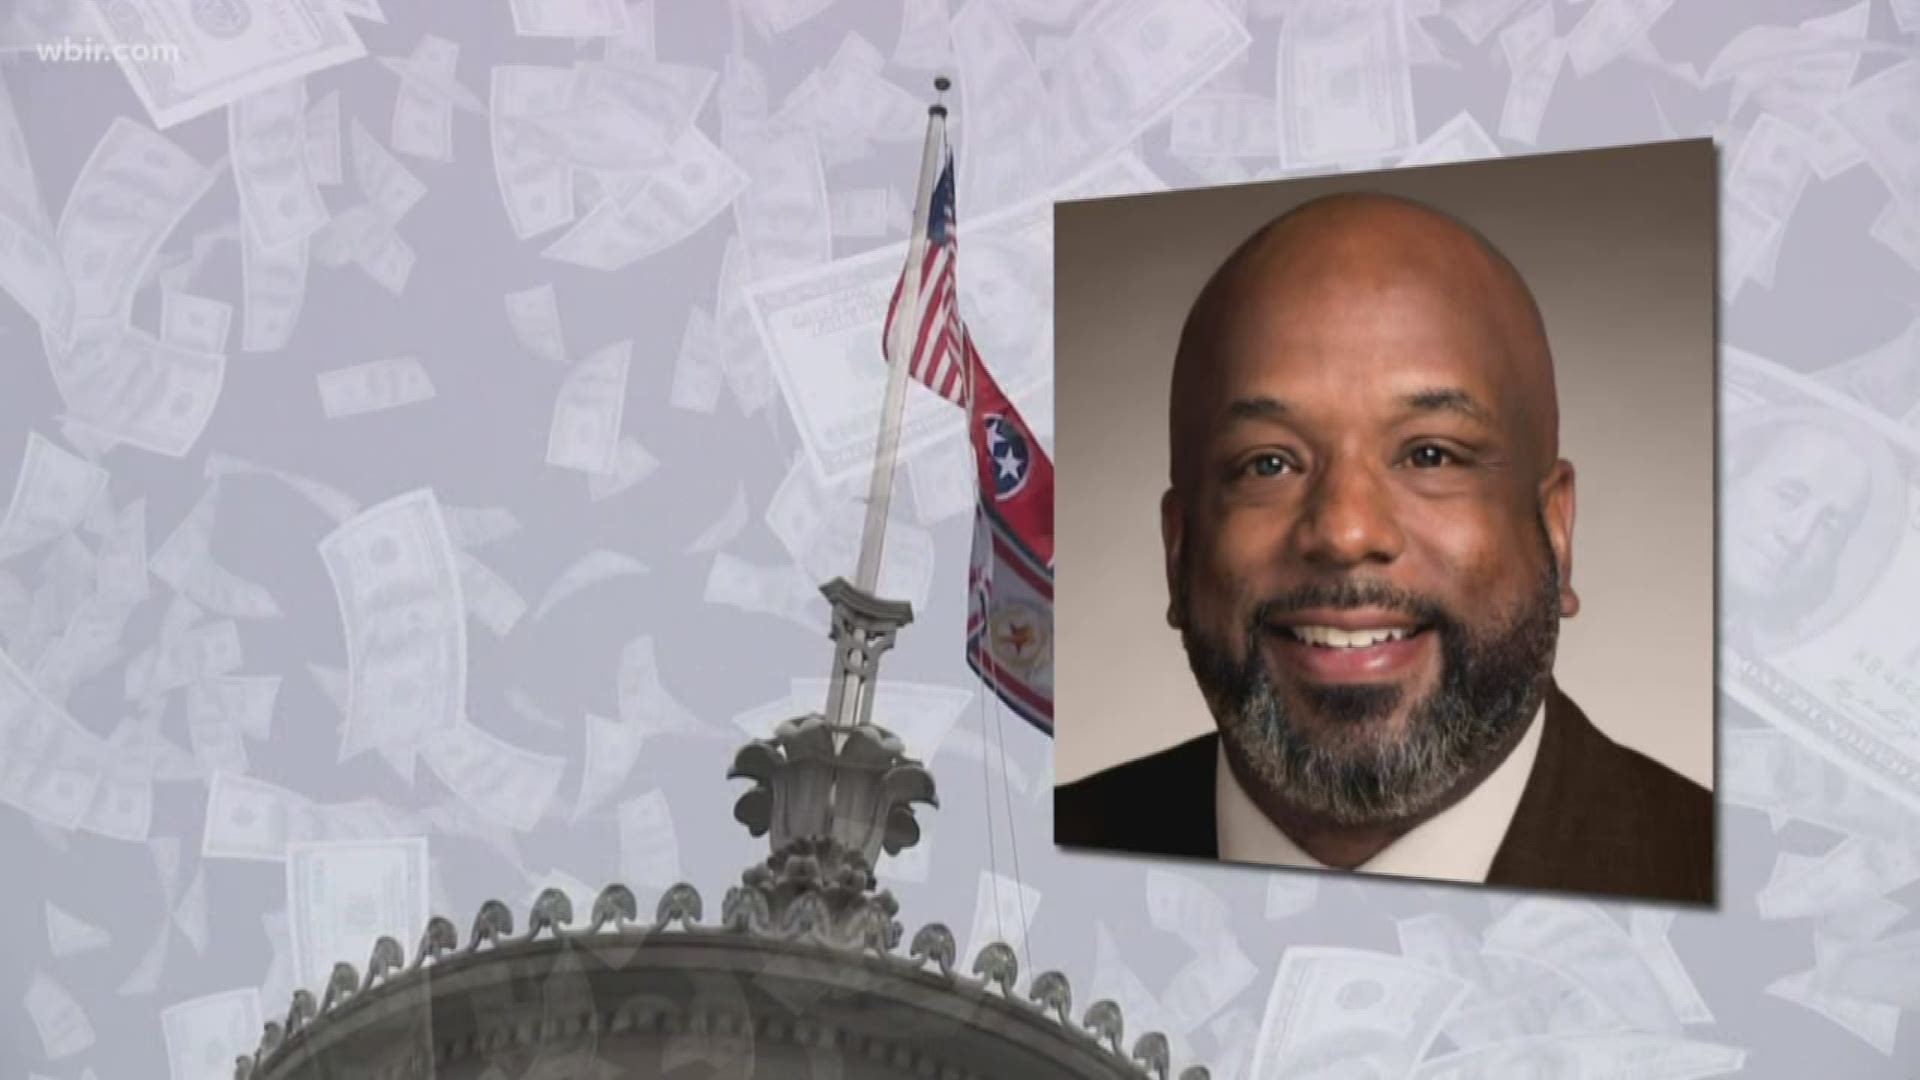 The Knoxville lawmaker's 2019 supplemental report includes bills for trips to Las Vegas, Jacksonville, Fla.